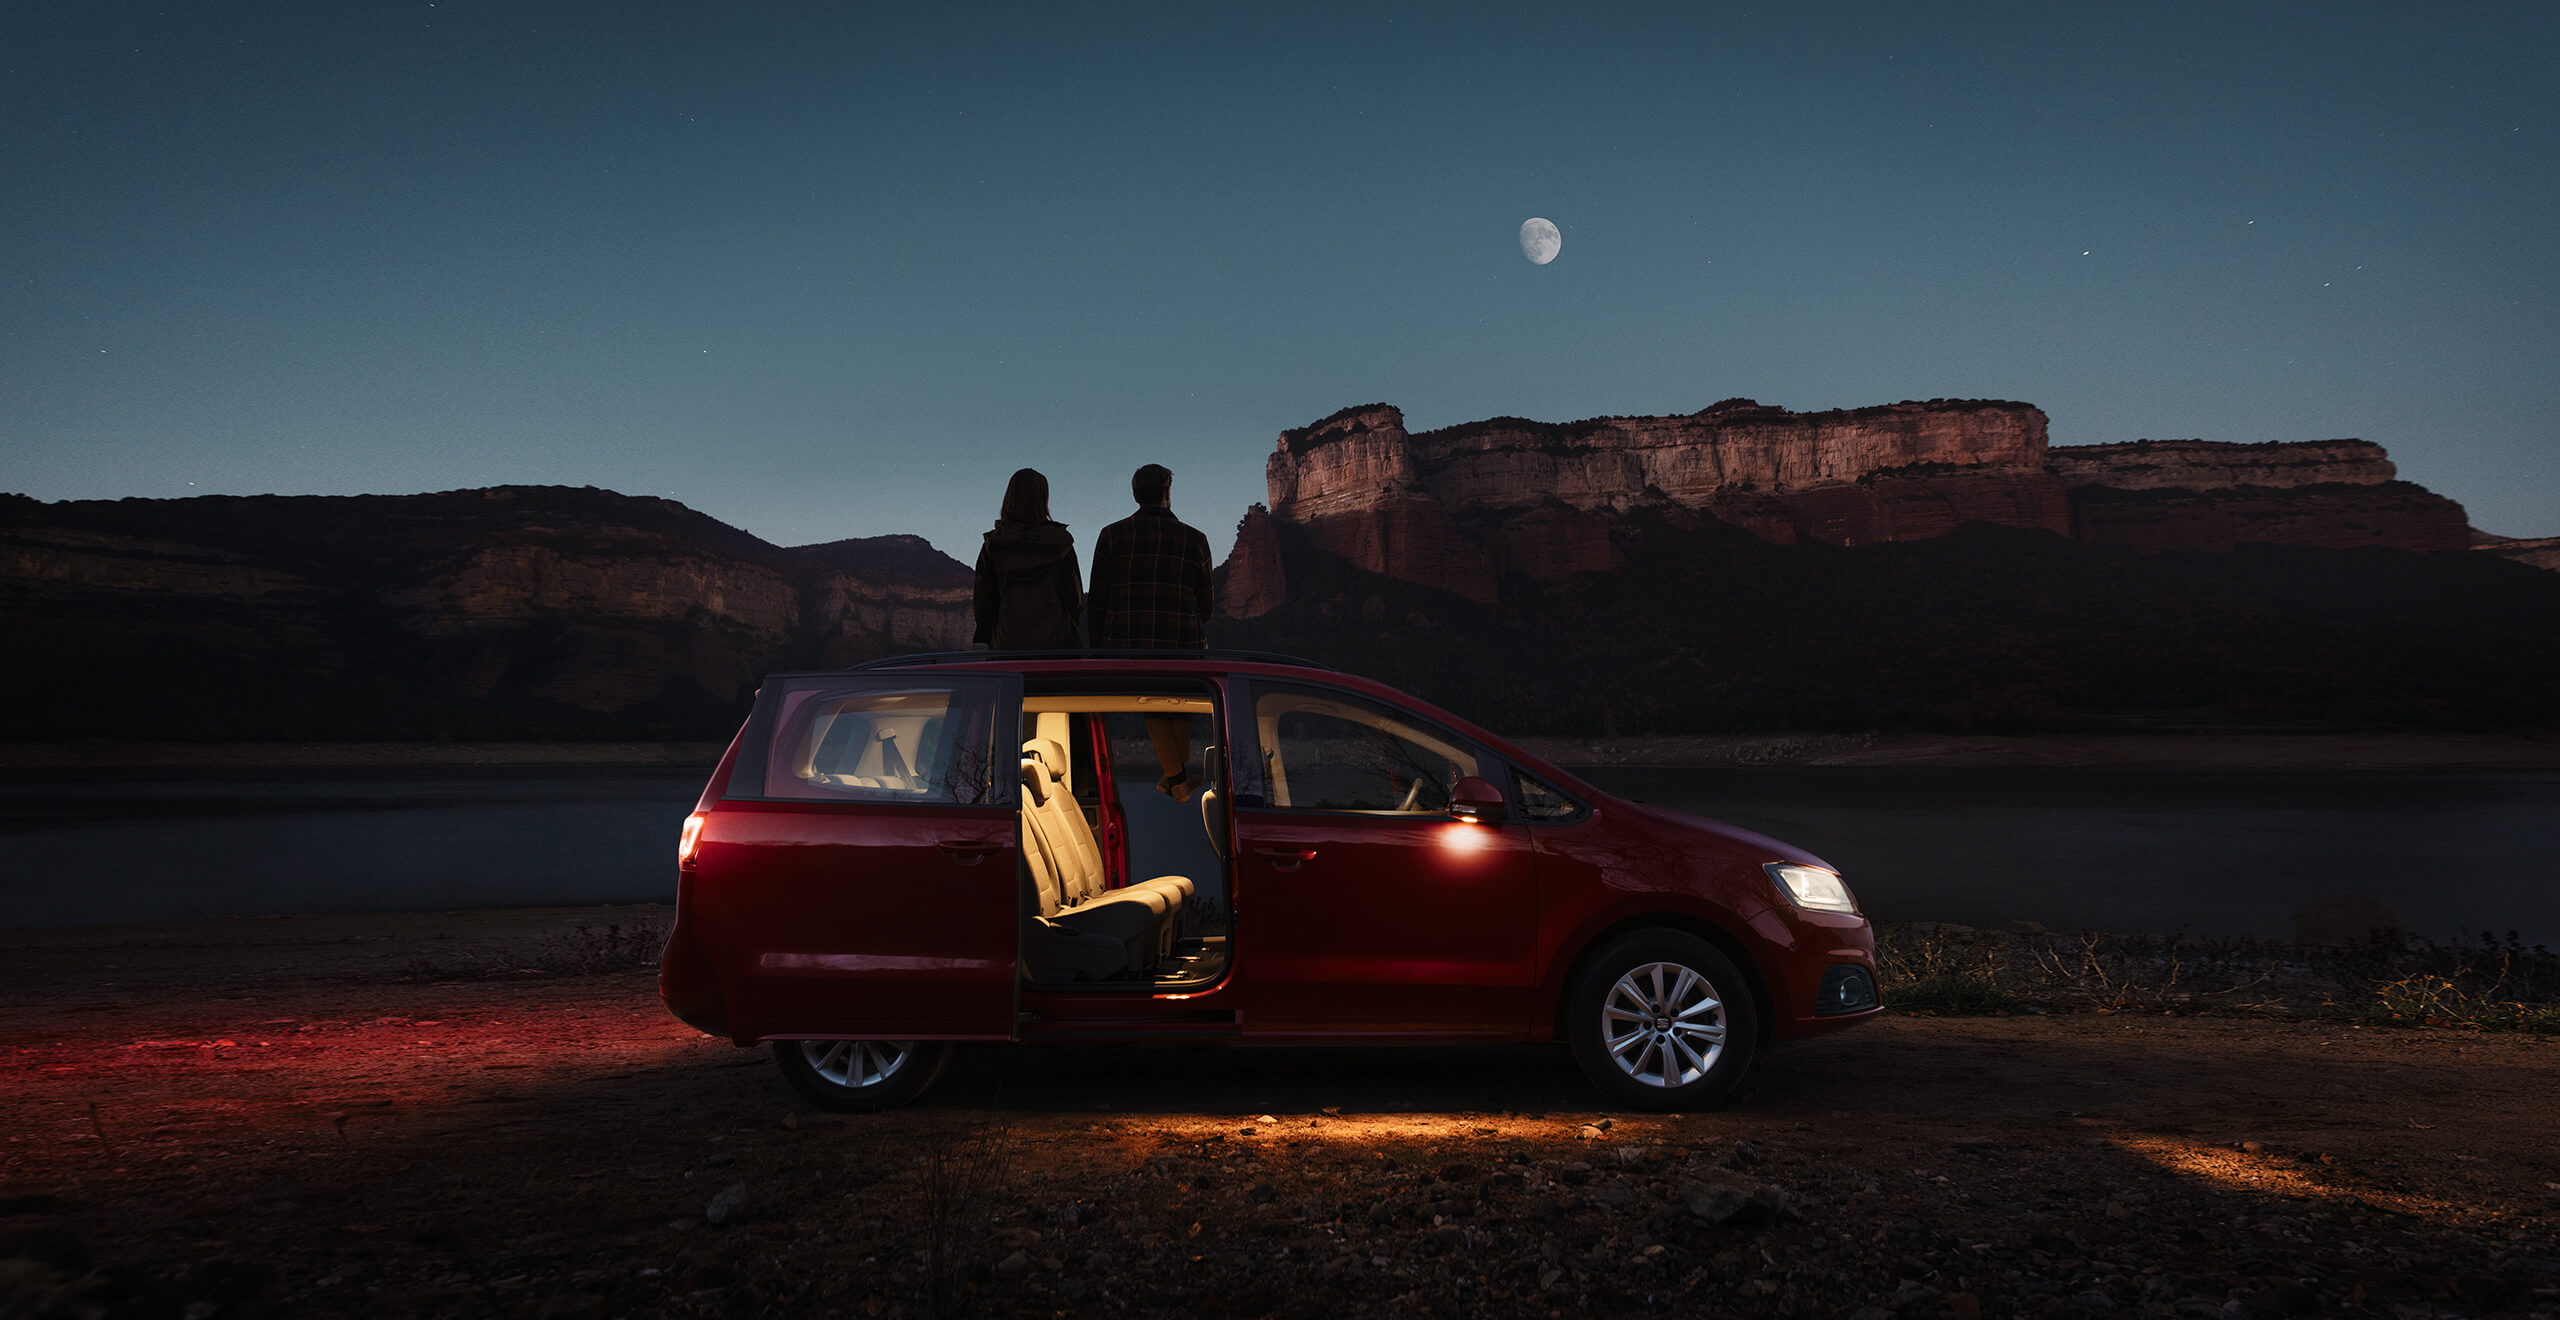 Dark night side view of SEAT Alhambra MPV with doors open and two people watching the moon and mountain landscape